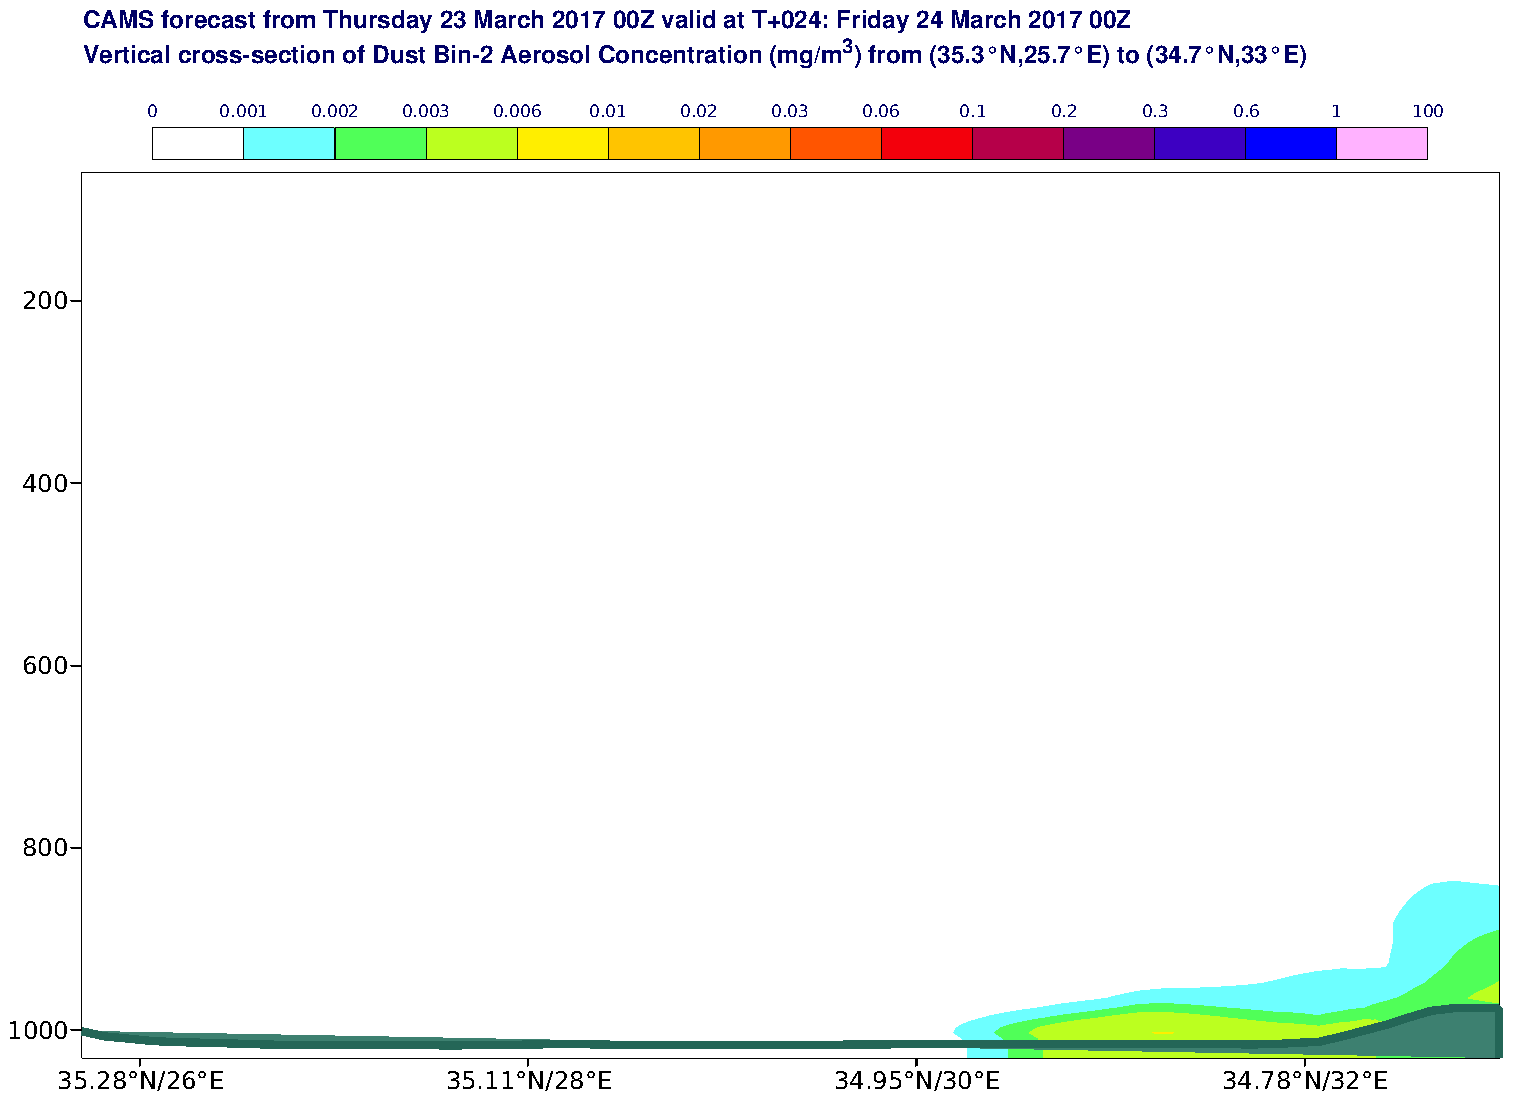 Vertical cross-section of Dust Bin-2 Aerosol Concentration (mg/m3) valid at T24 - 2017-03-24 00:00